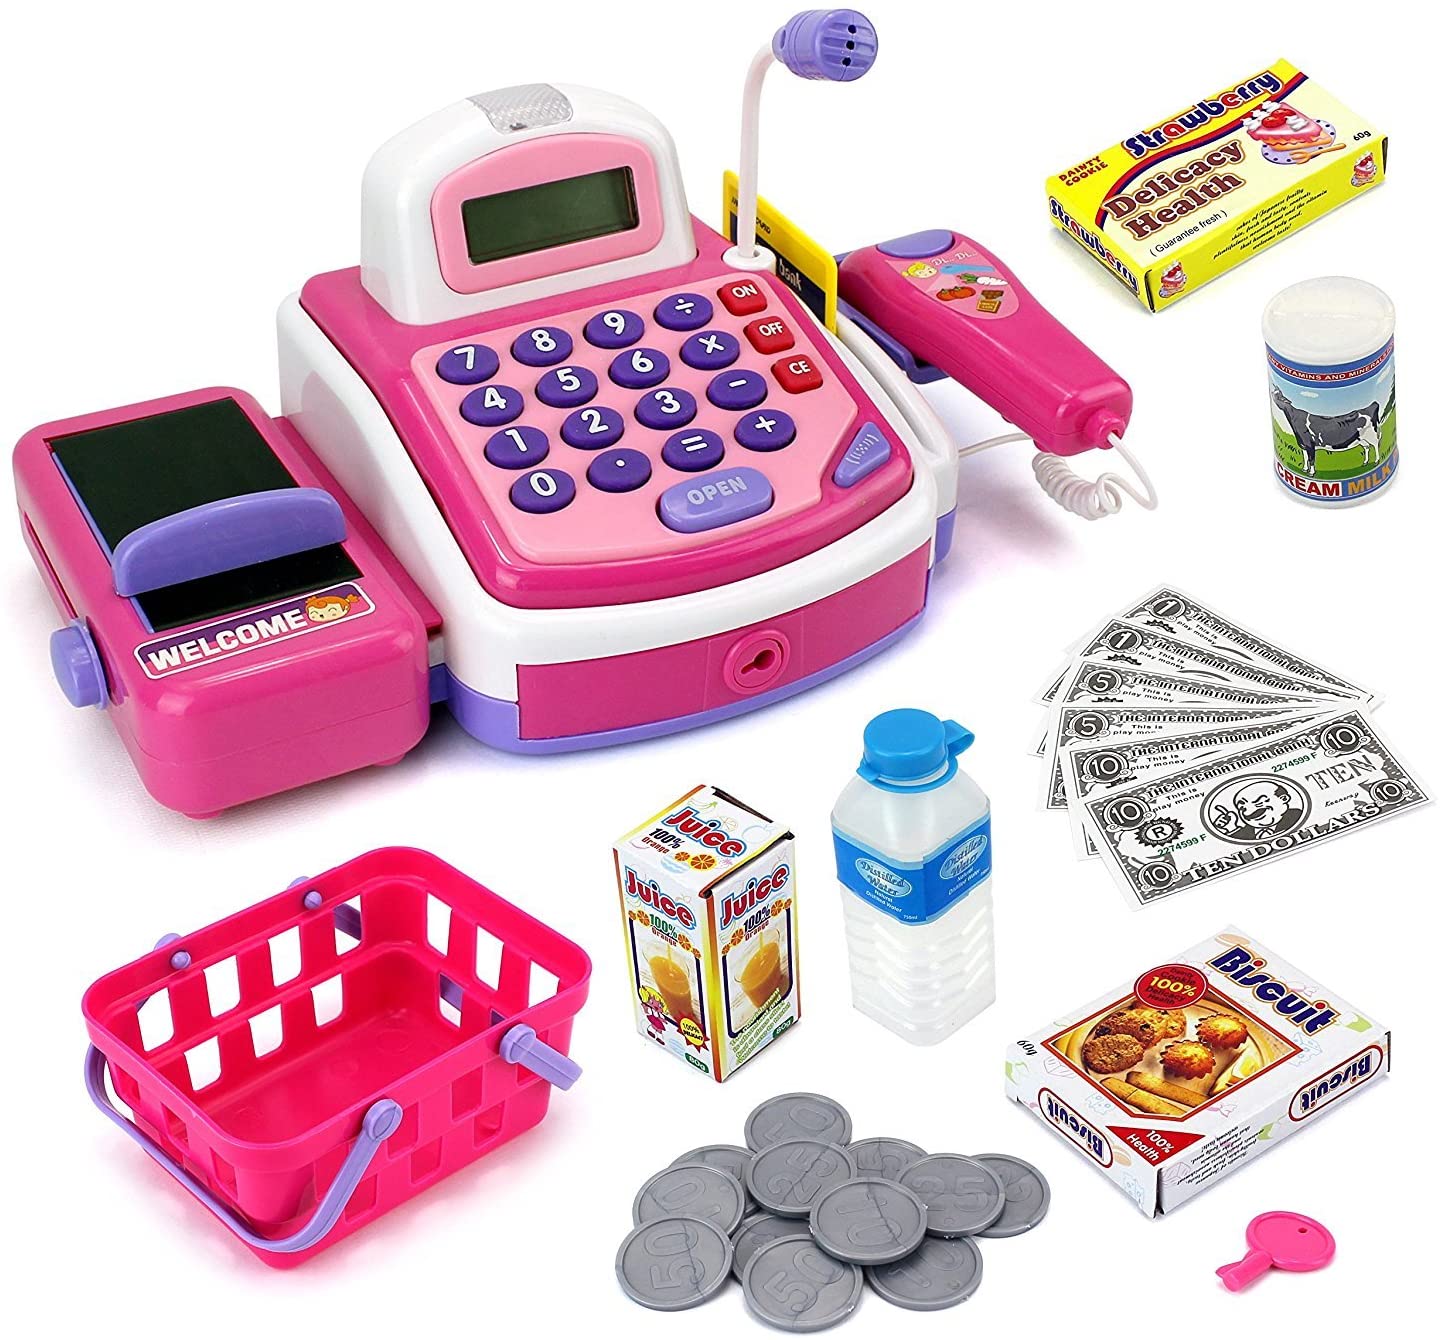 Pretend Play Electronic Cash Register Toy Realistic Actions and Sounds,  Multi-function: comes with a variety of features including a working  calculator, voice.., By Visit the Velocity Toys Store - Walmart.com